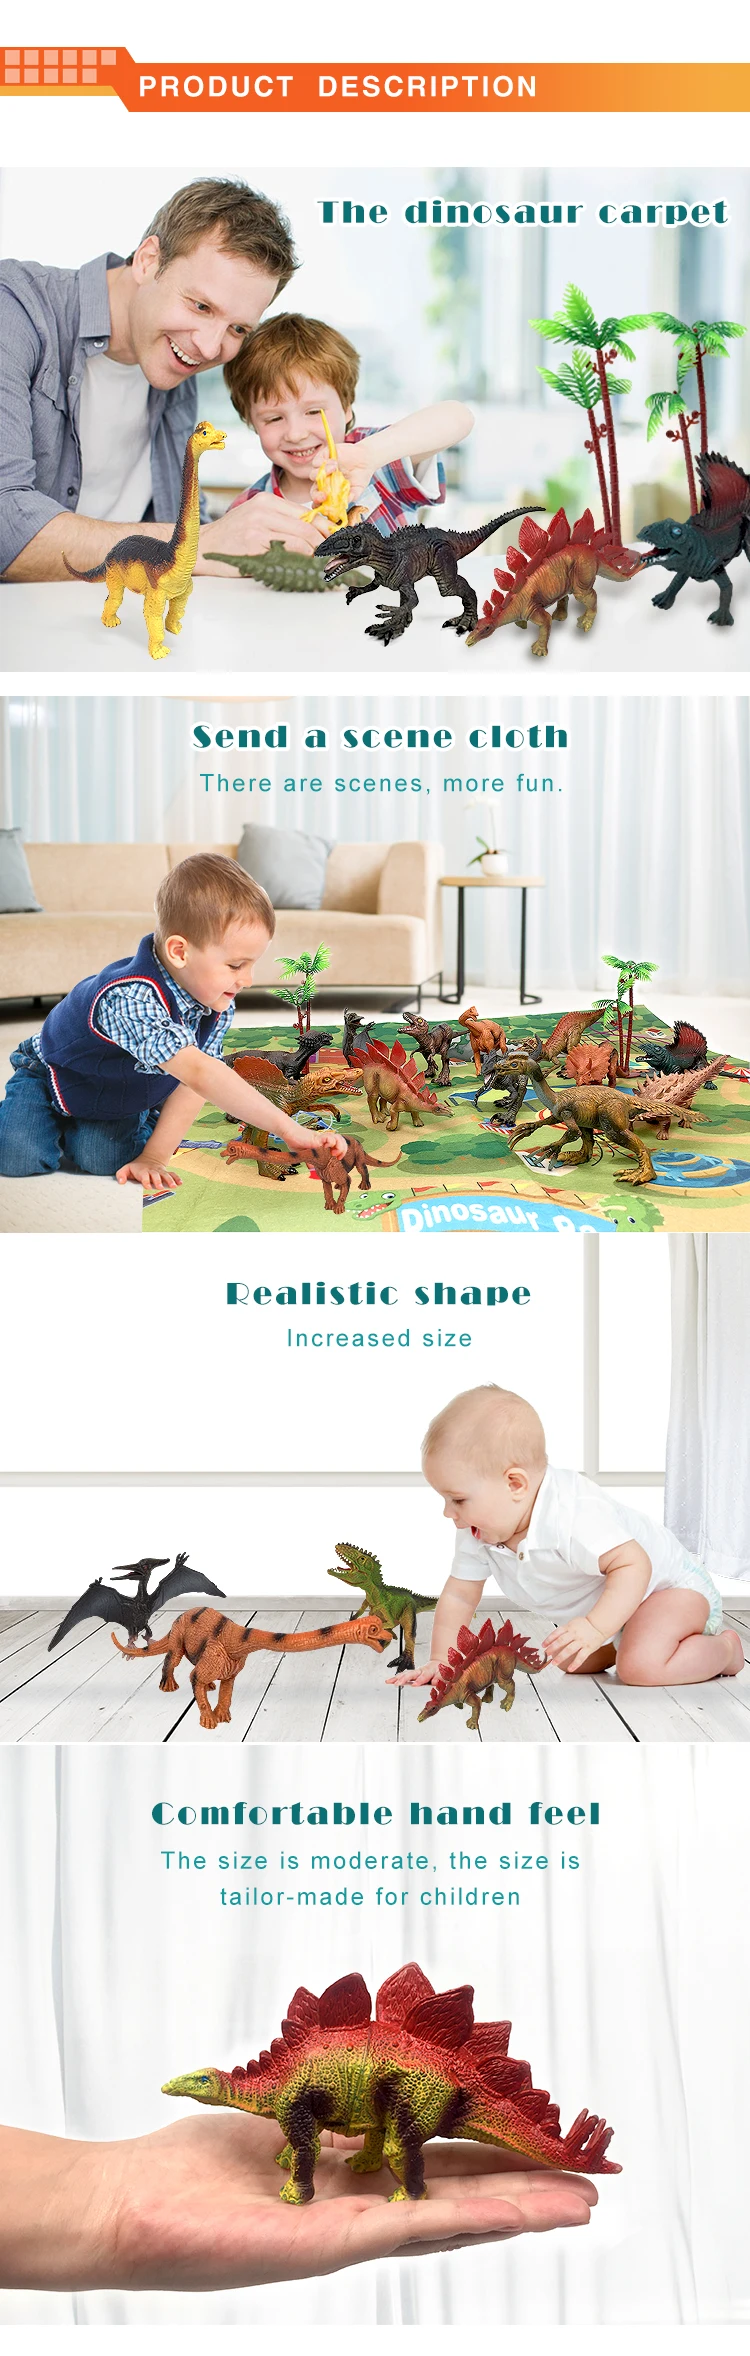 Amazon hot sale kids educational toy 9 models dinosaur toy figure with activity play mat